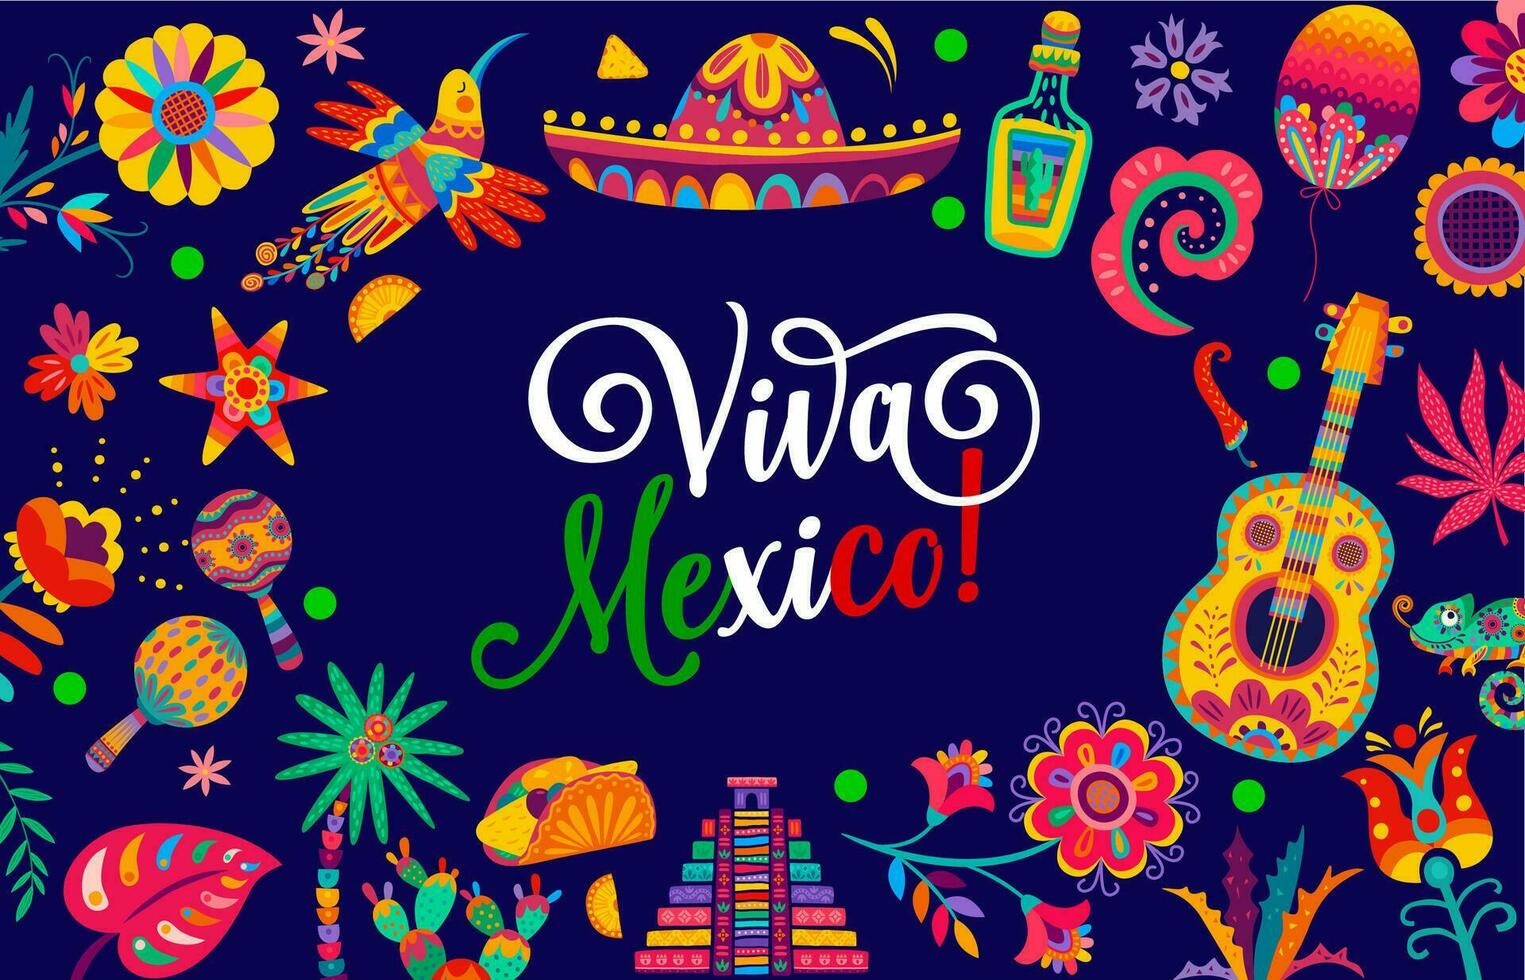 Viva Mexico banner with tropical flowers, sombrero vector